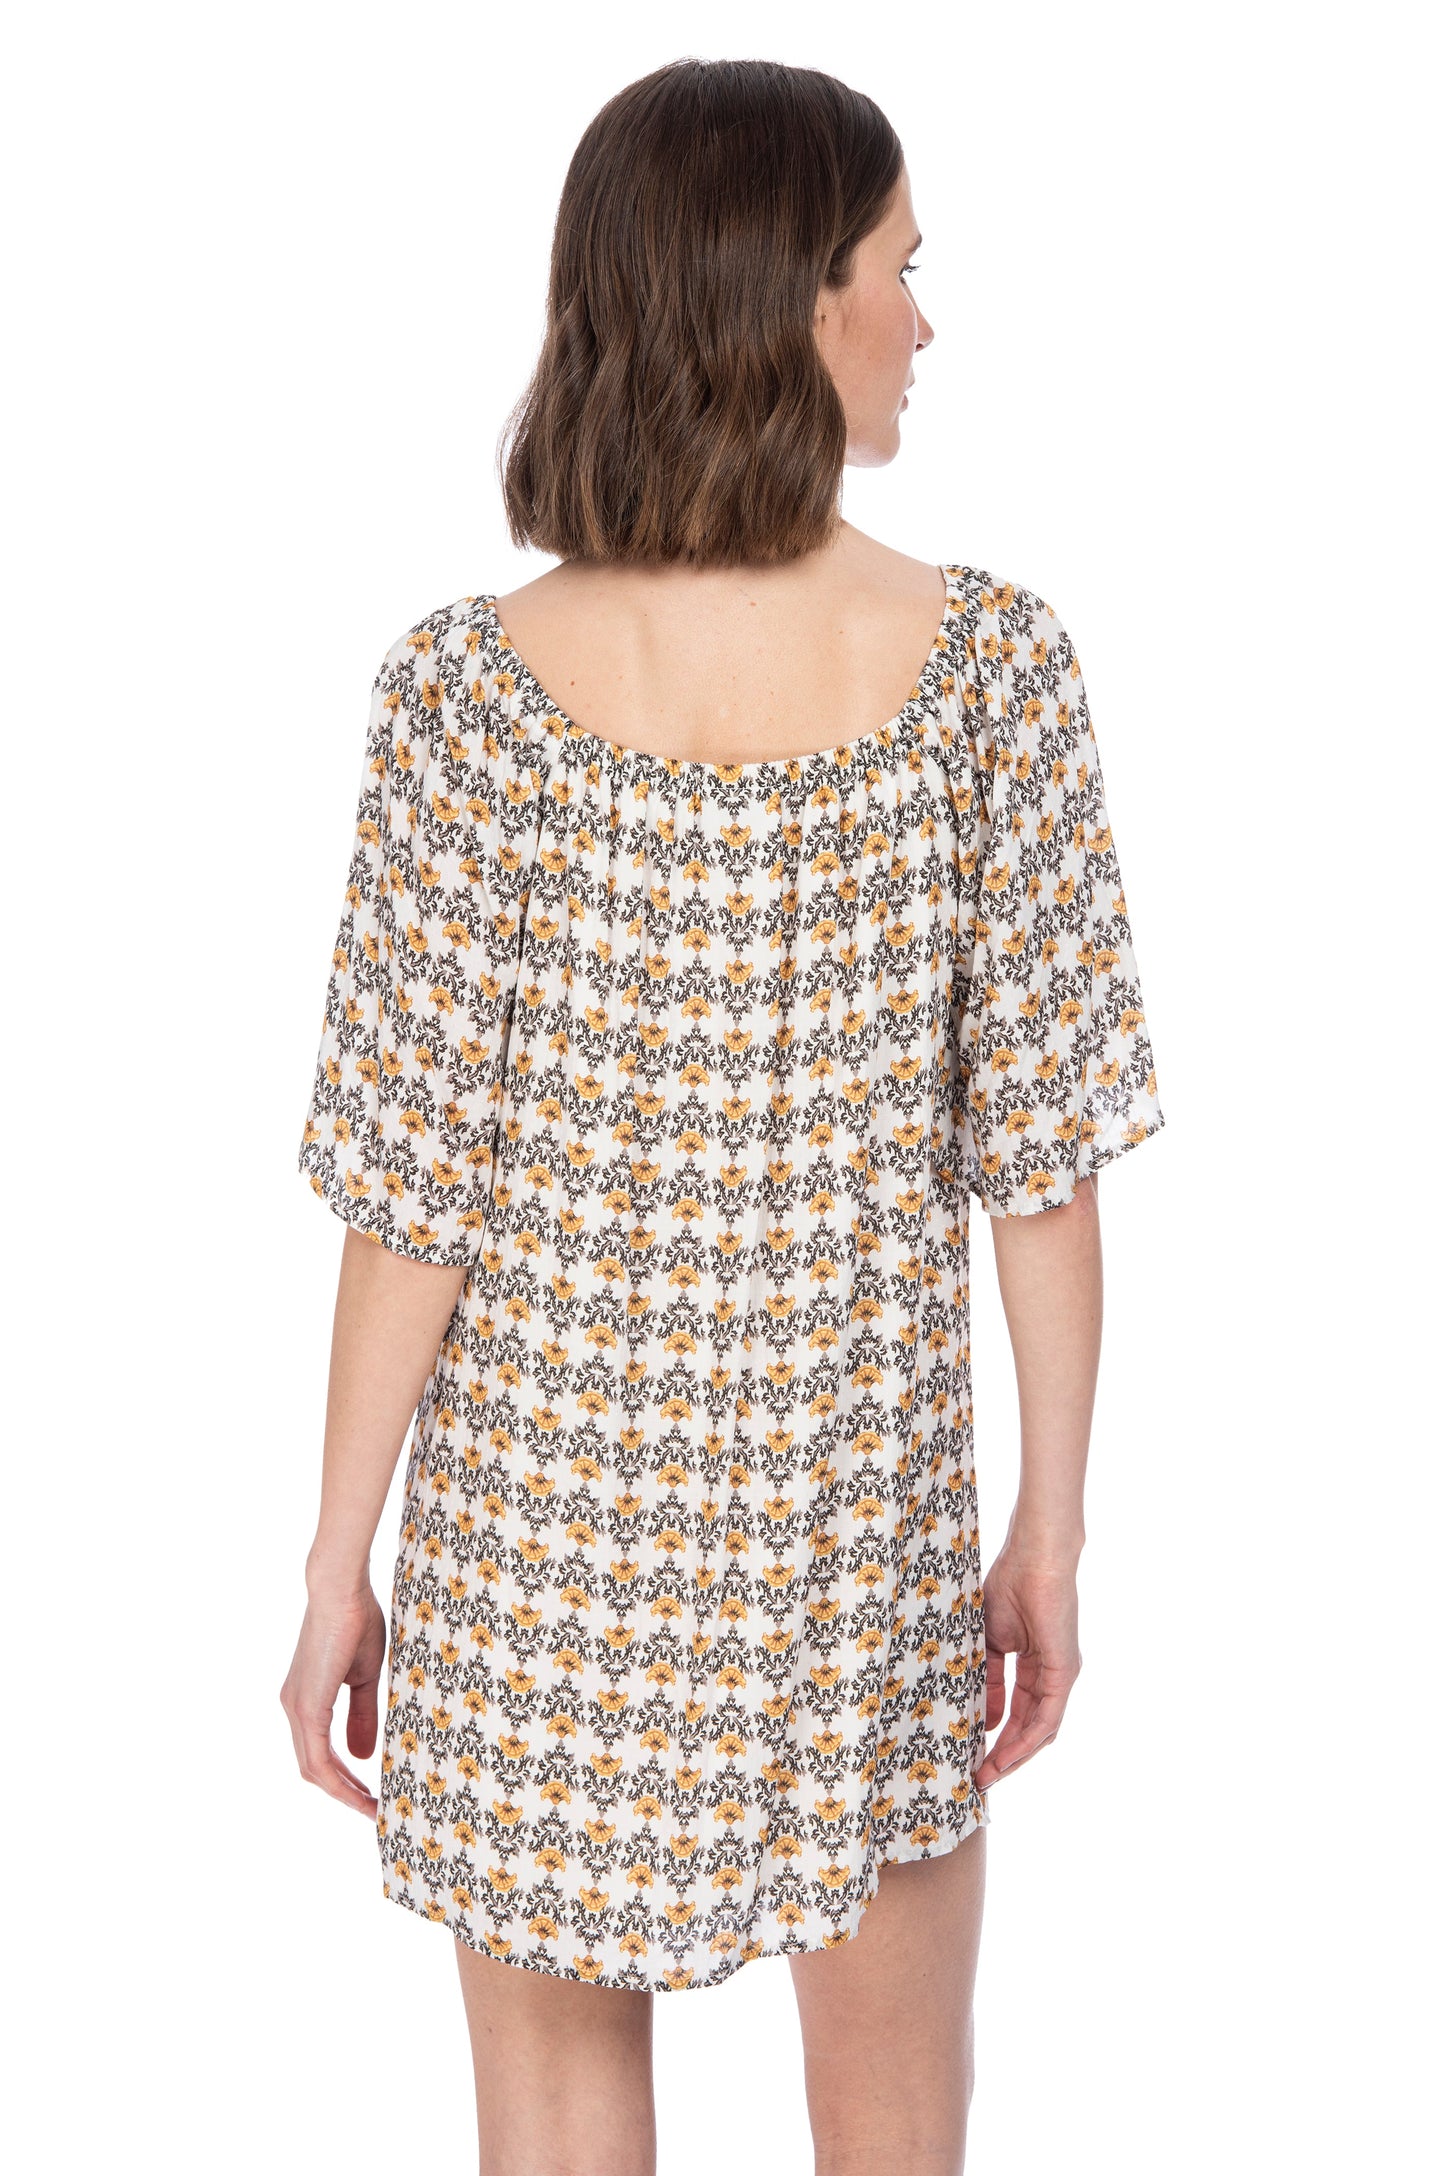 A woman viewed from behind, wearing a versatile dress designed with Rayon Dobby fabric, showcasing an off-shoulder neckline and short sleeves by B Collection by Bobeau ELBOW SLV SHIFT DRESS.